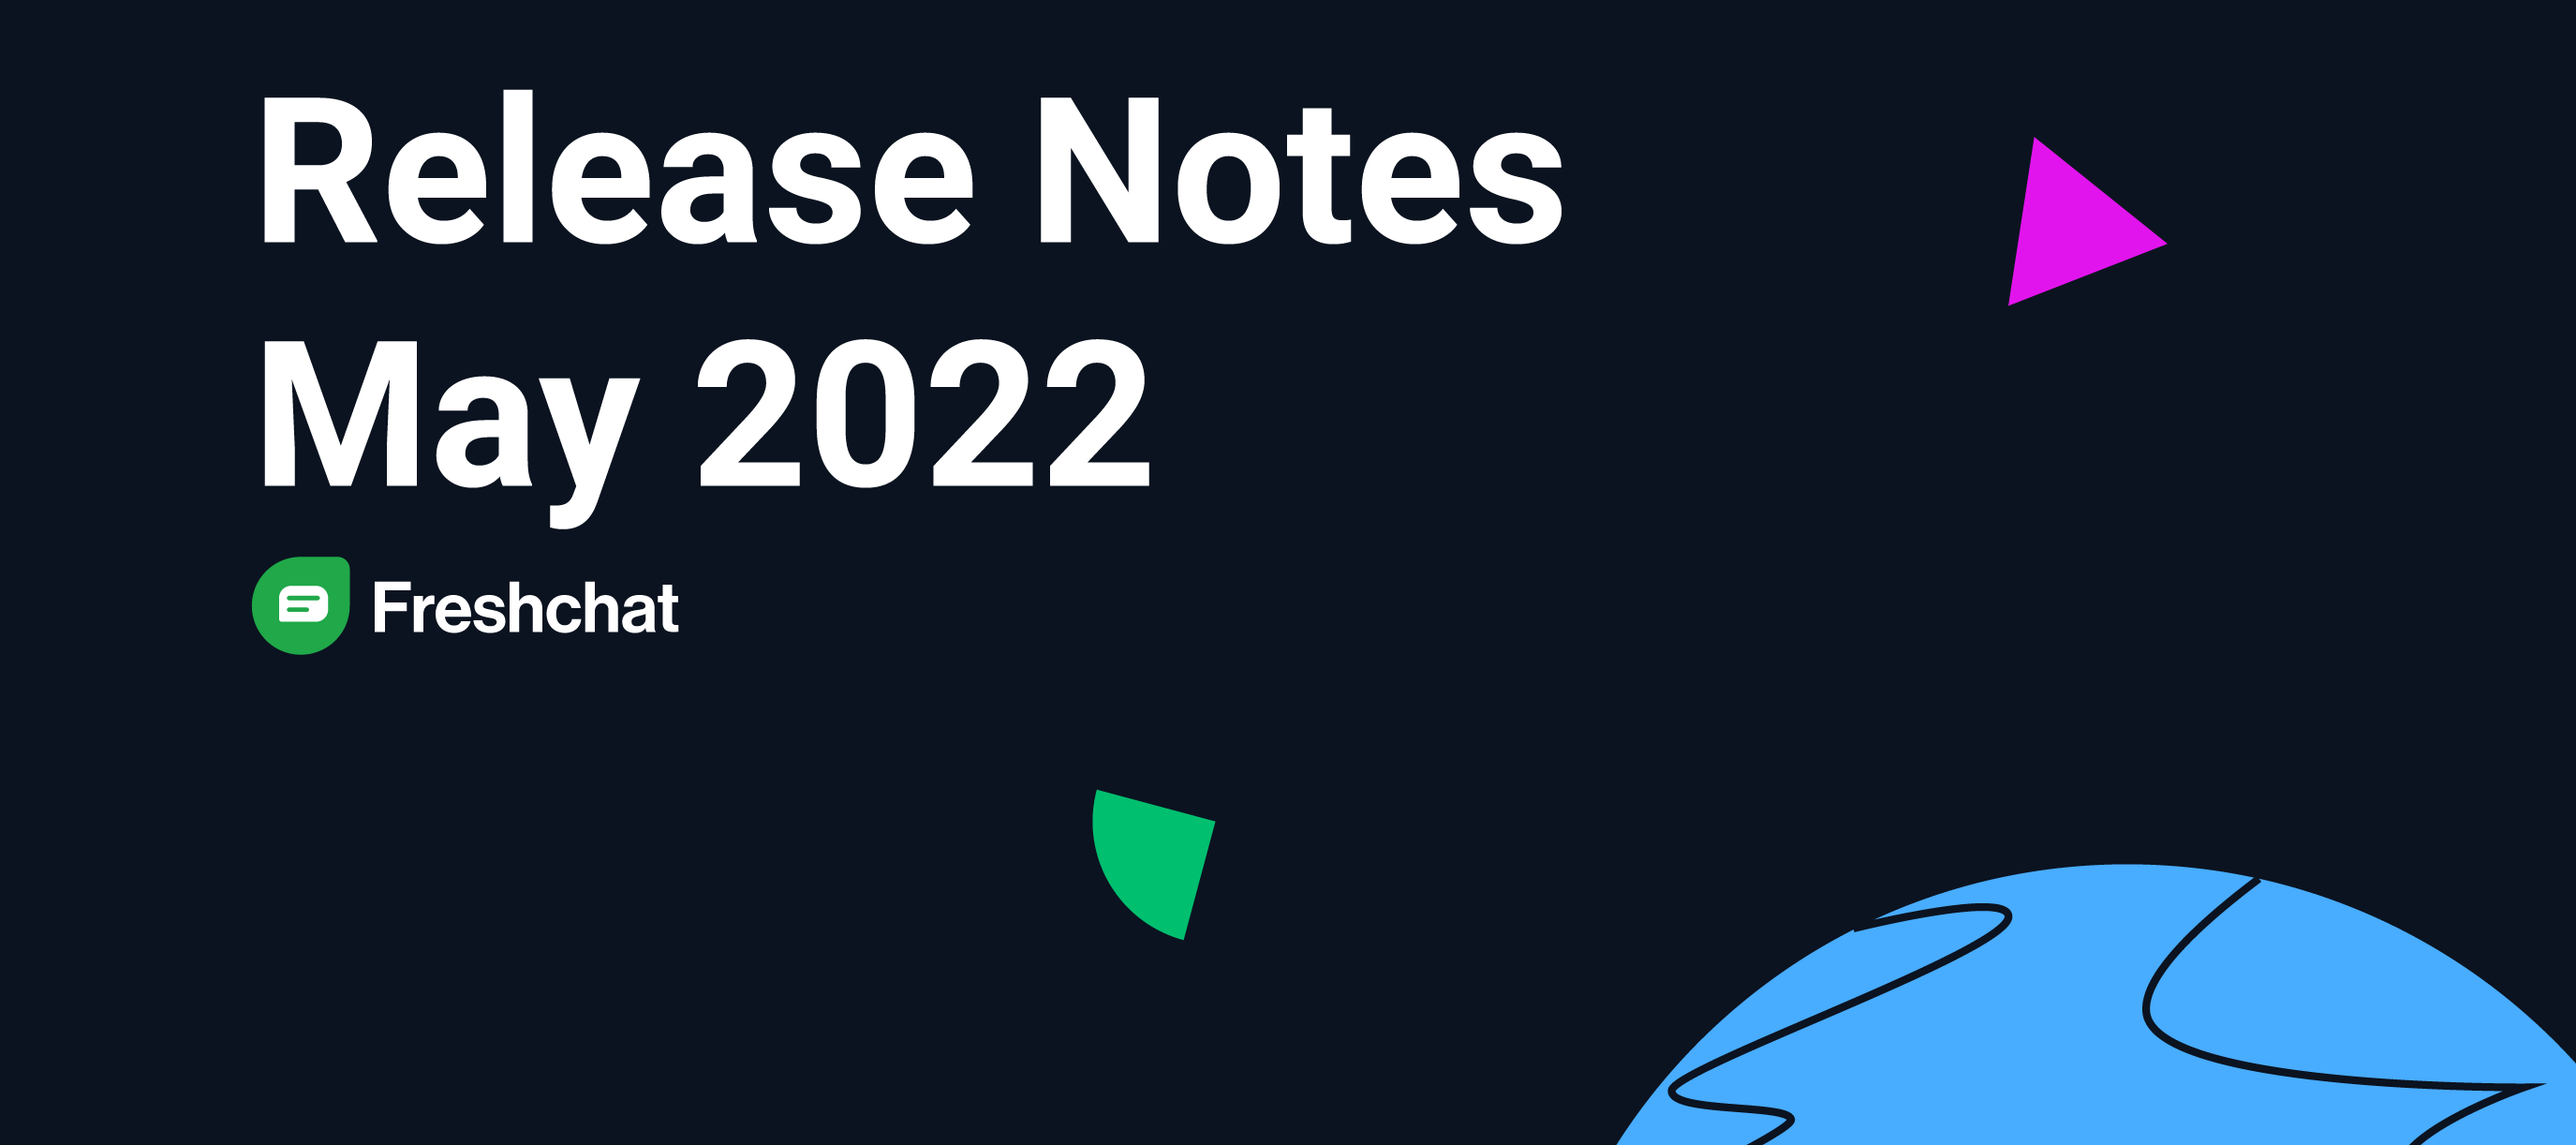 Freshchat Release Notes - May 2022